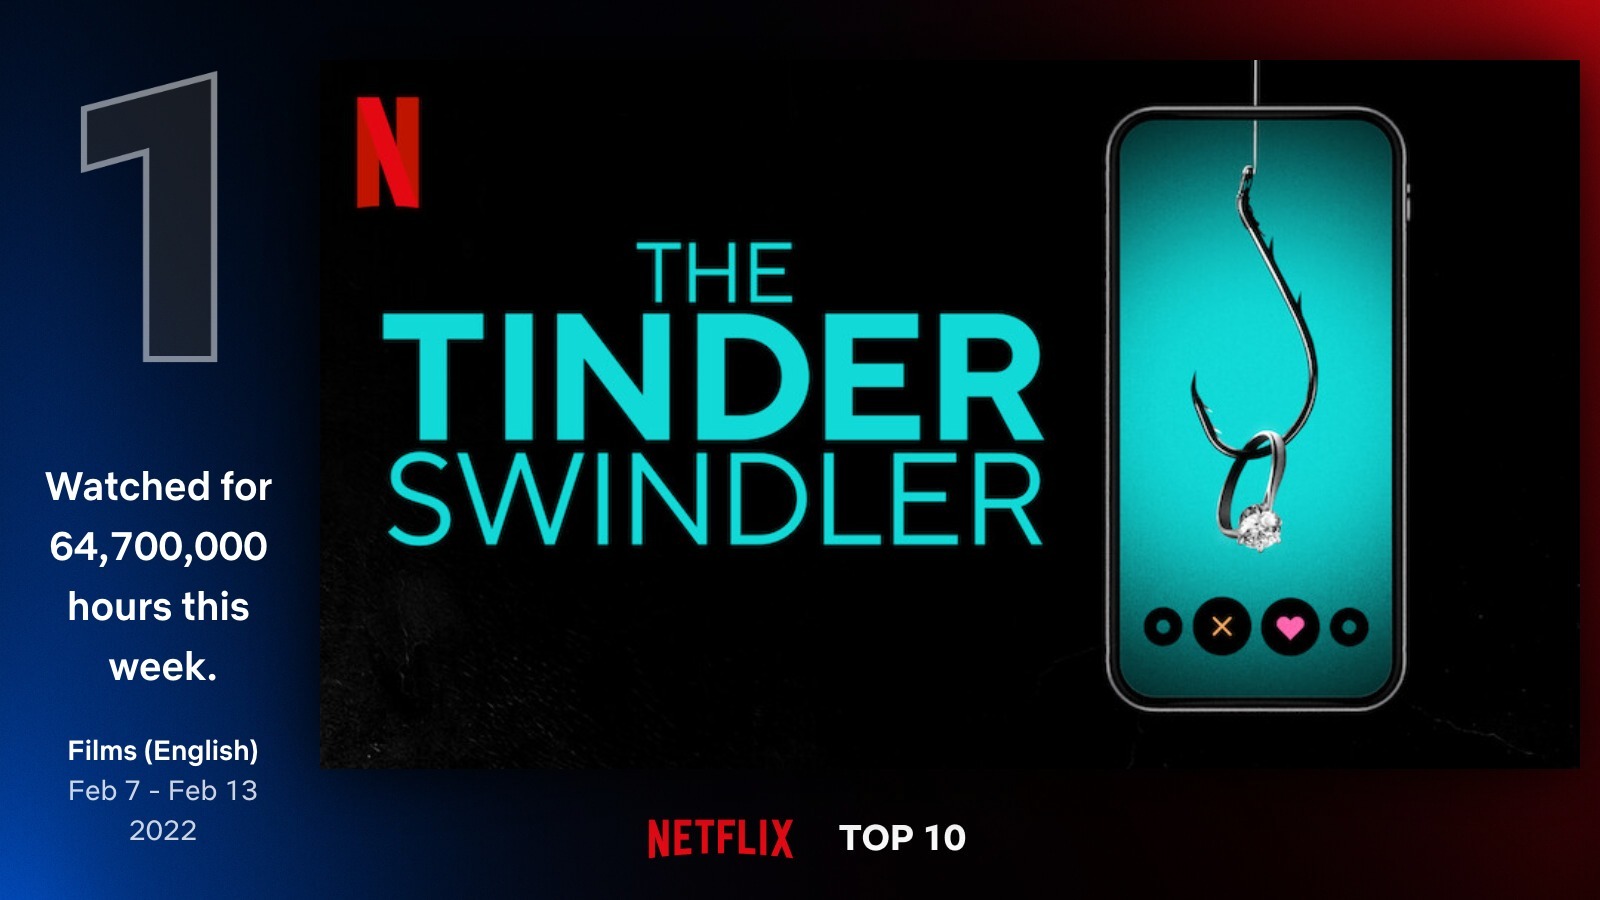 ‘Inventing Anna’ and ‘The Tinder Swindler’ are the Most Popular Titles on Netflix Right Now